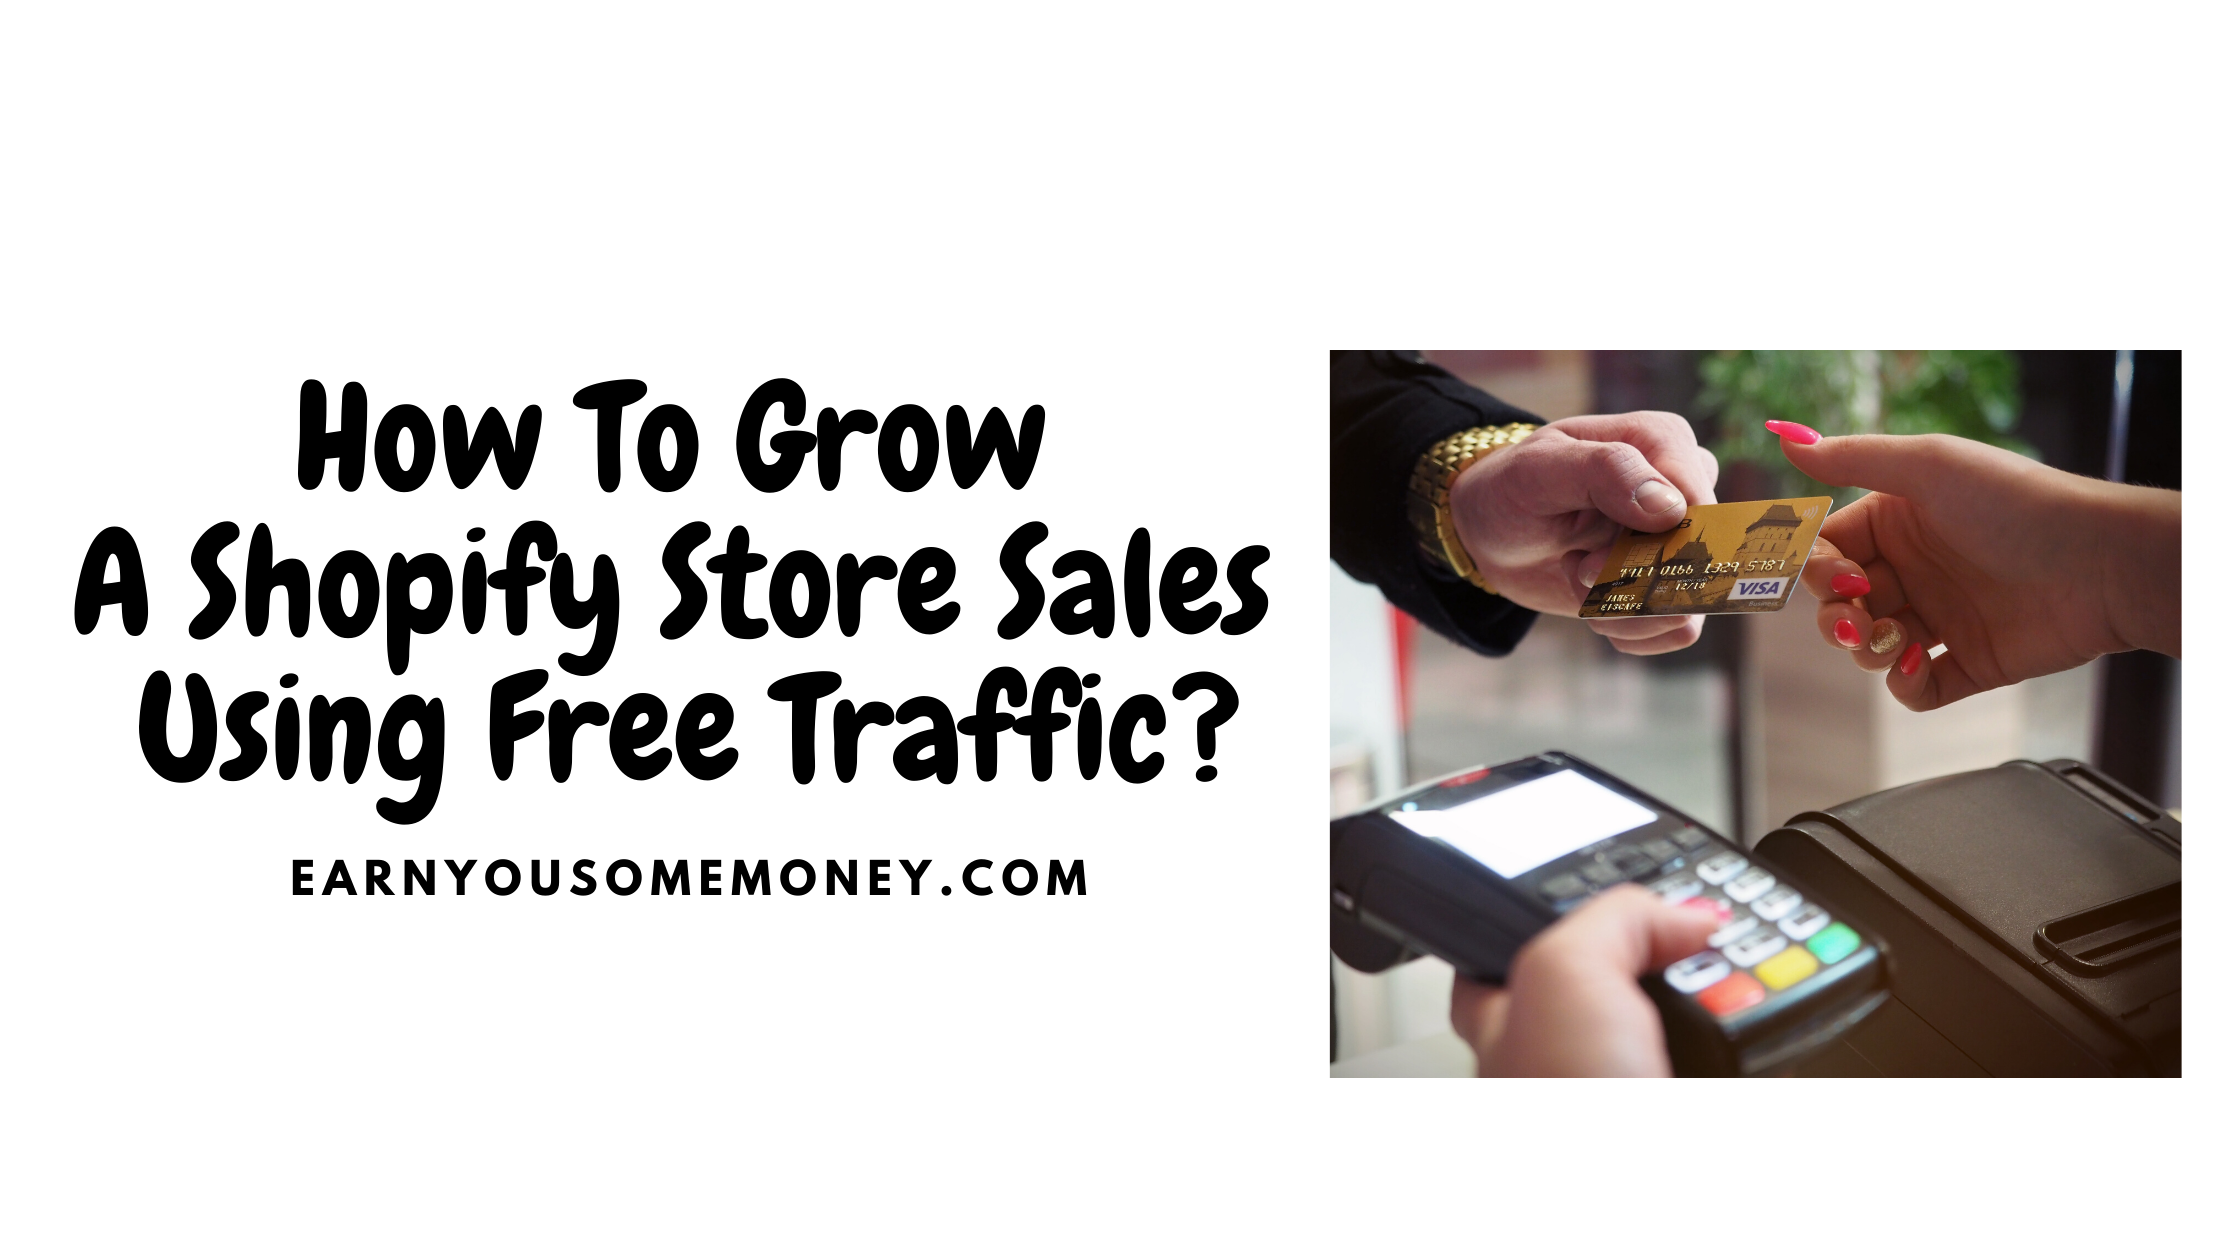 How To Grow A Shopify Store Sales Using Free Traffic?